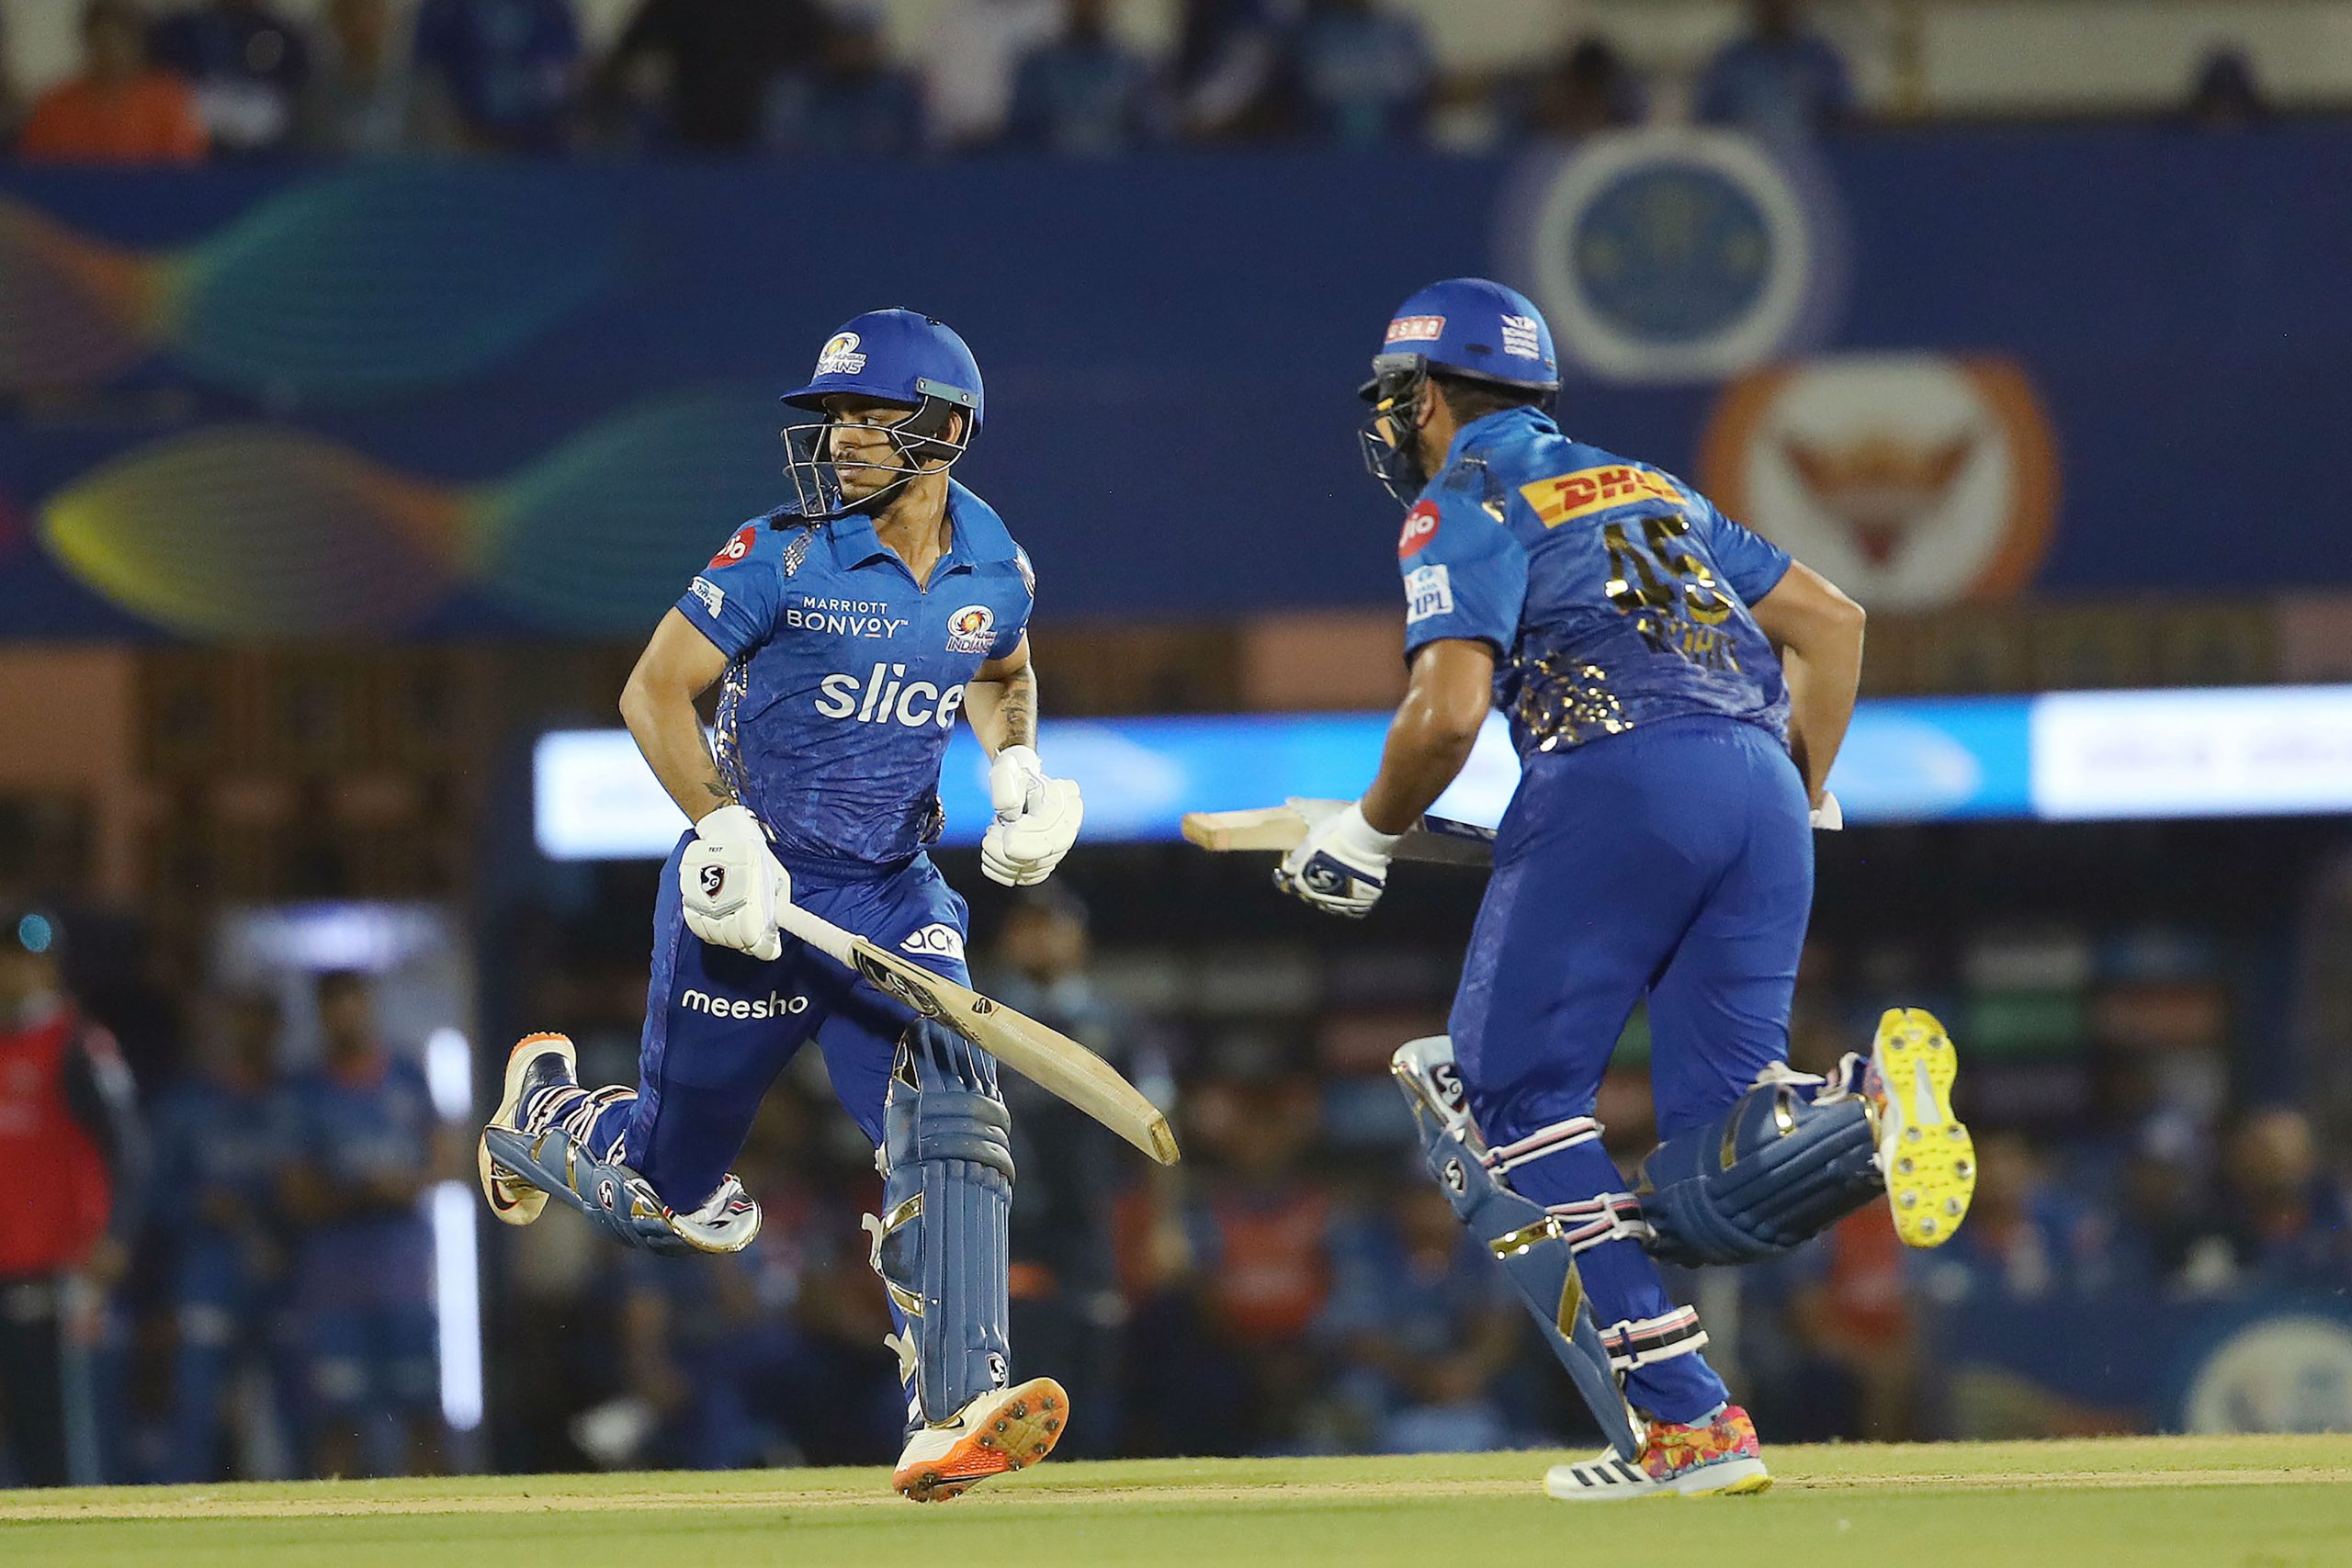 Mumbai Indians become the first team to be eliminated from IPL 2022